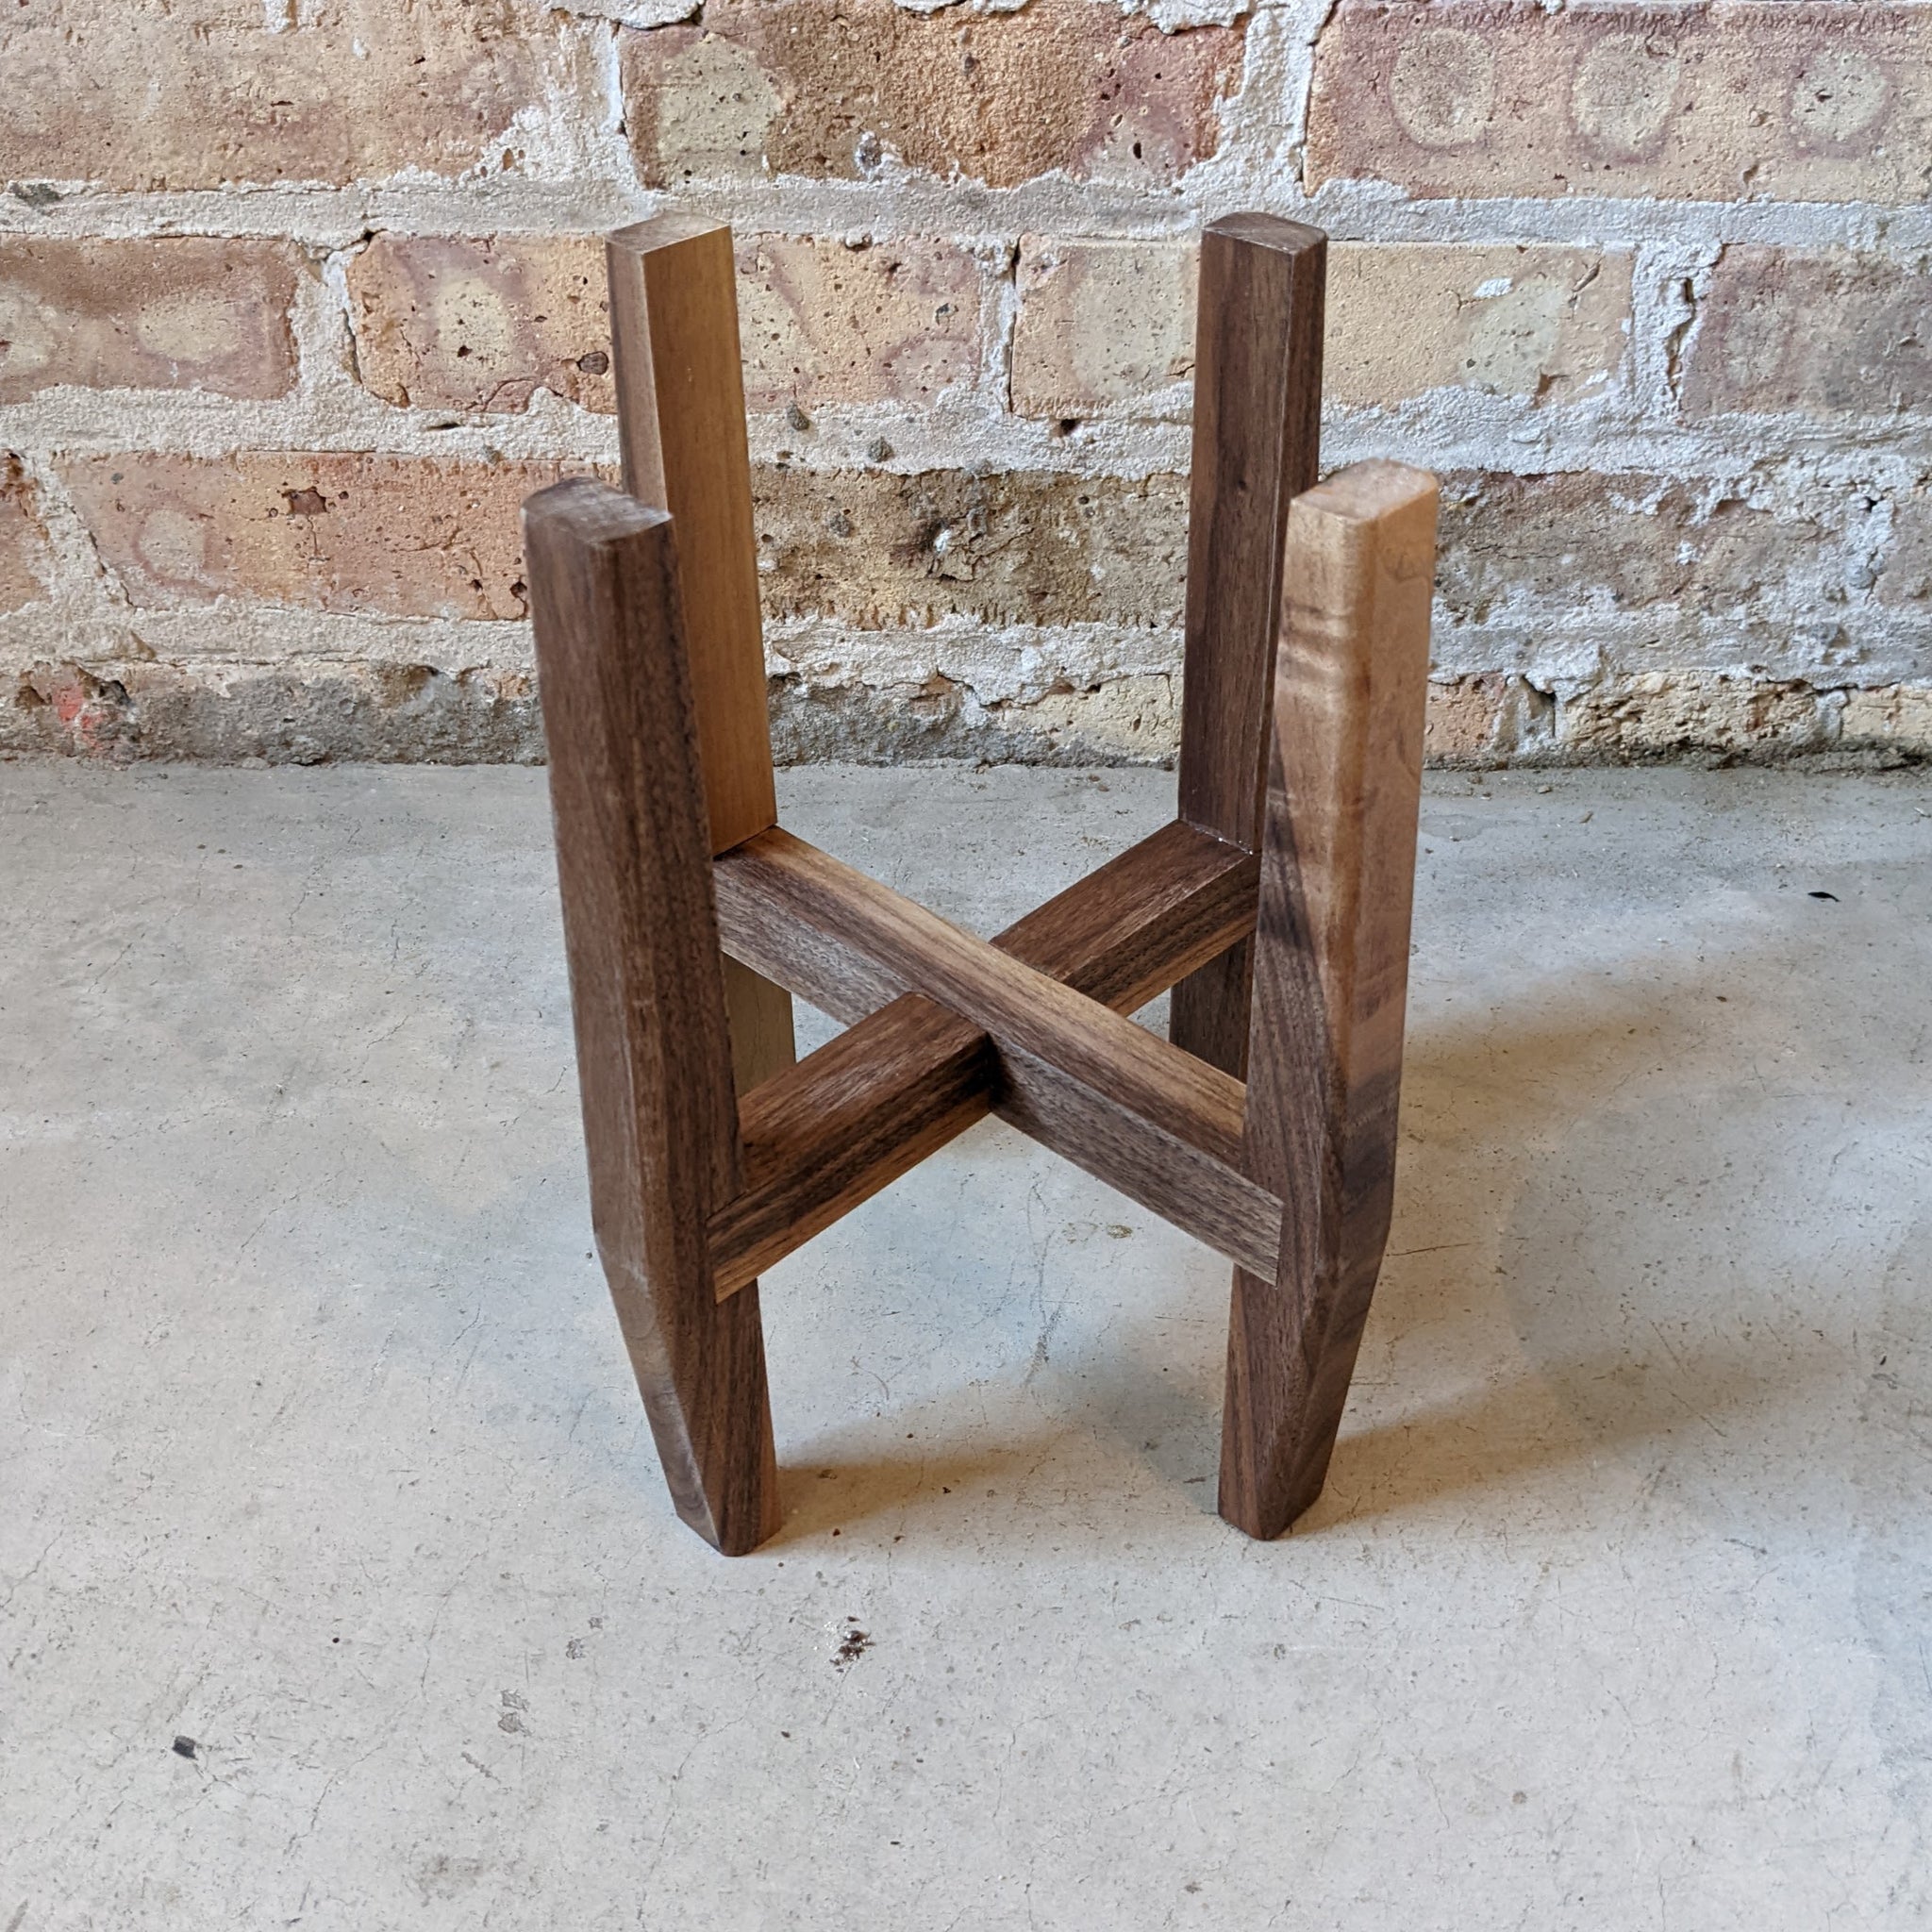 Locally made walnut plant stand for houseplants available at Rooted in Chicago.